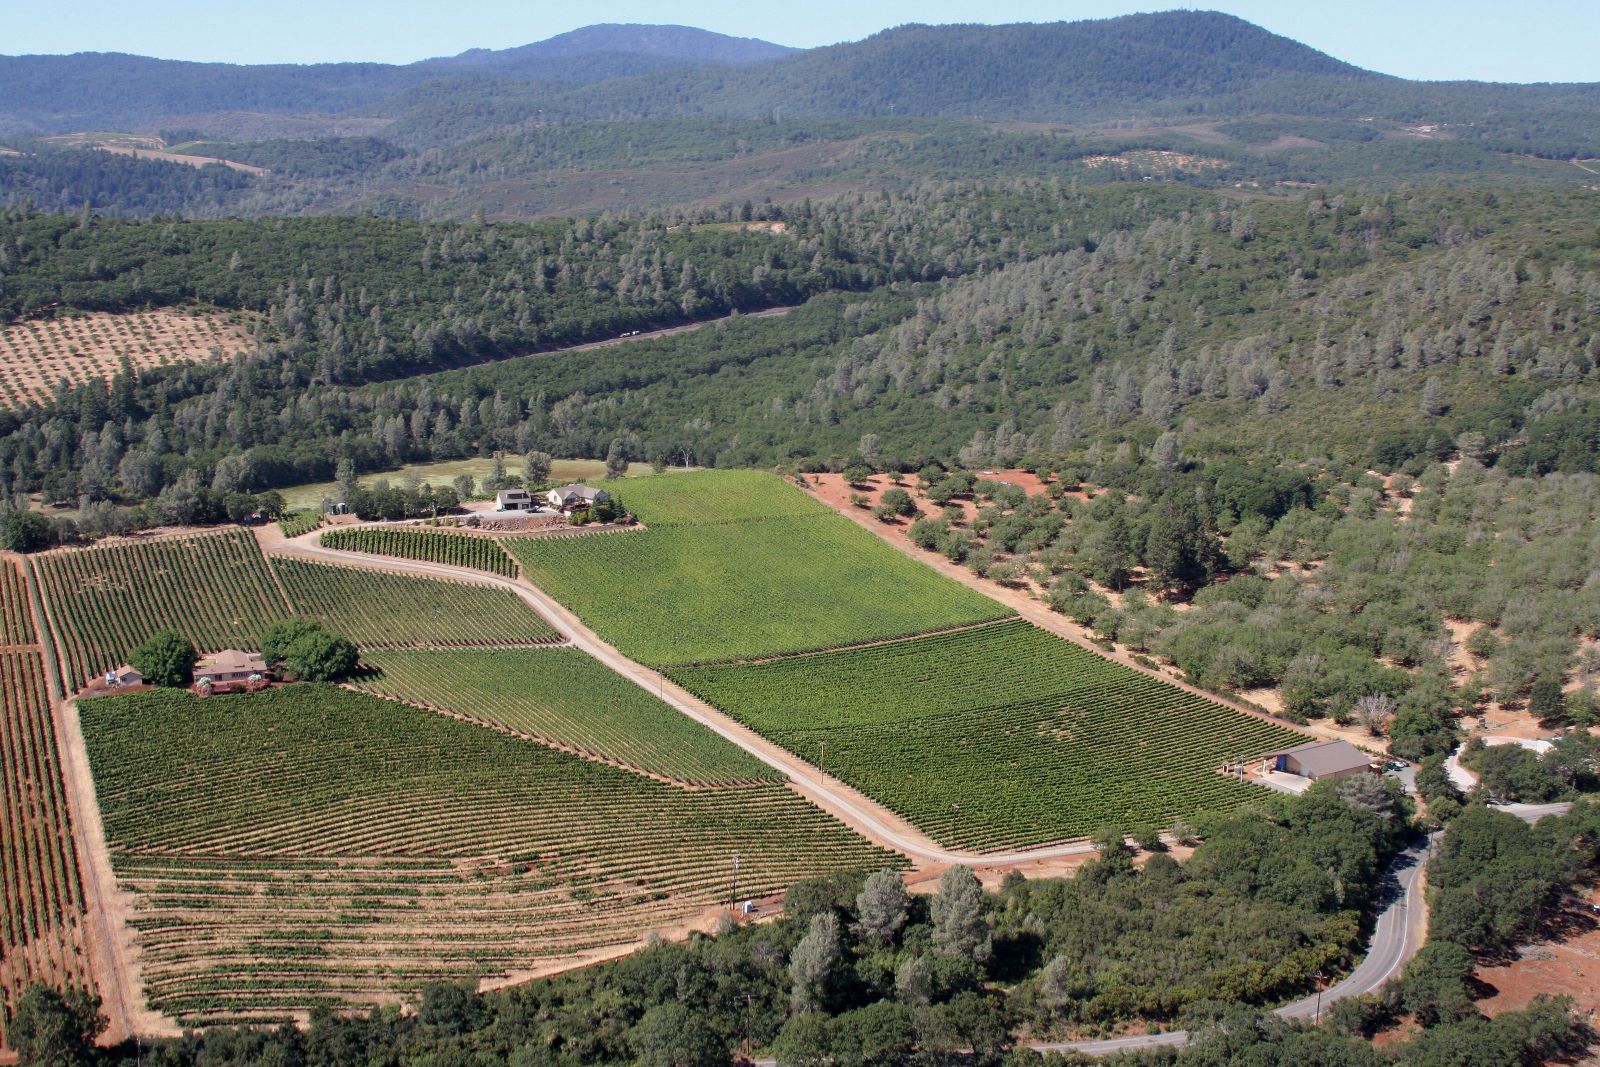 Aerial view of the property: houses, vineyard and winery, with Red Hills mountains in the background